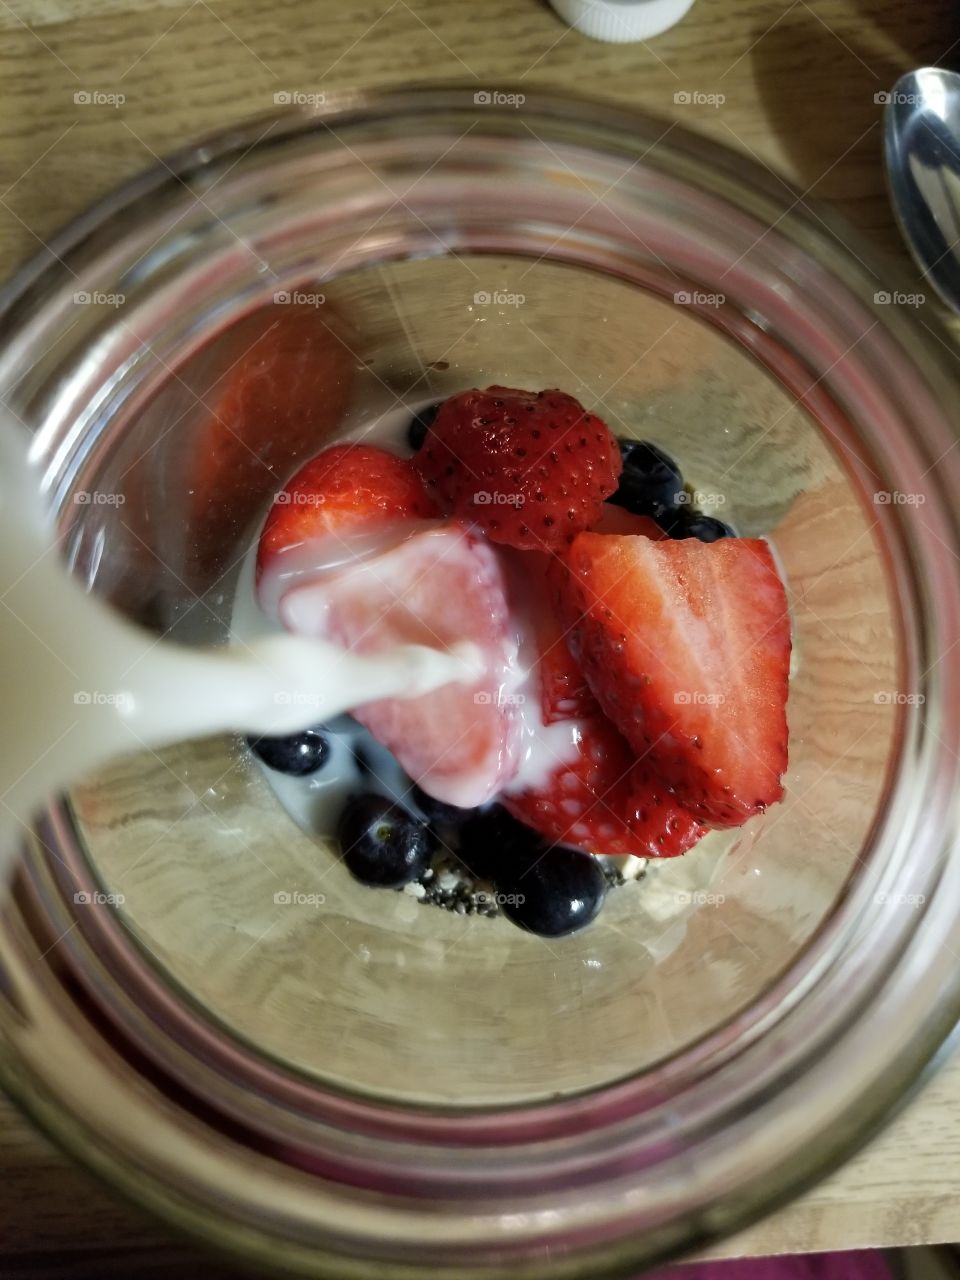 Overnight oats at its yummiest. Berries and oats with chia seeds and almond milk.